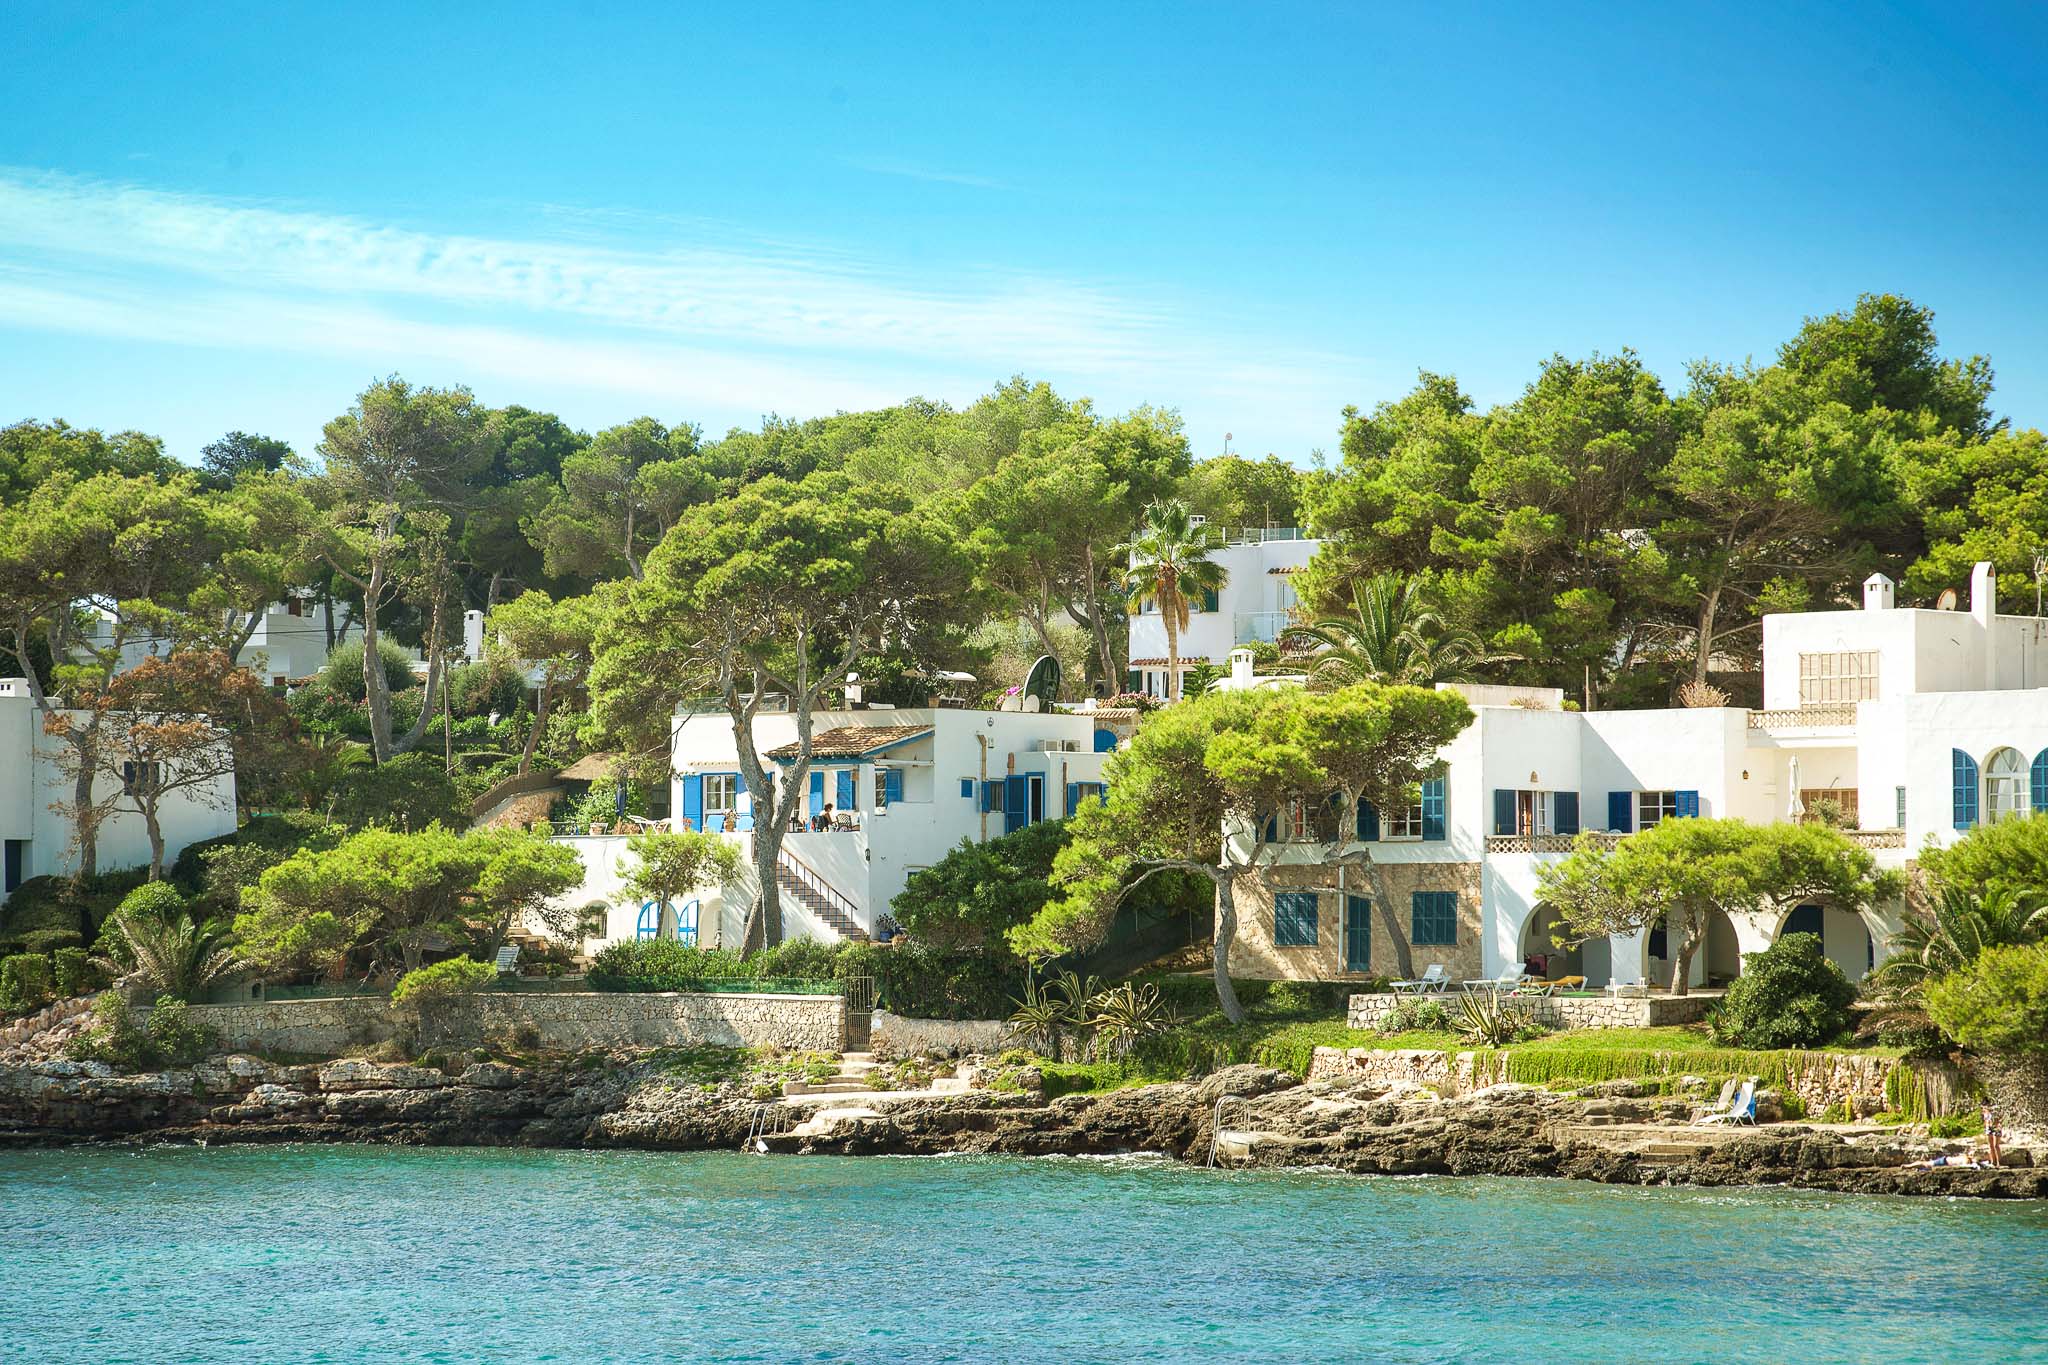 Cala d'or coast with pine trees and white hauses